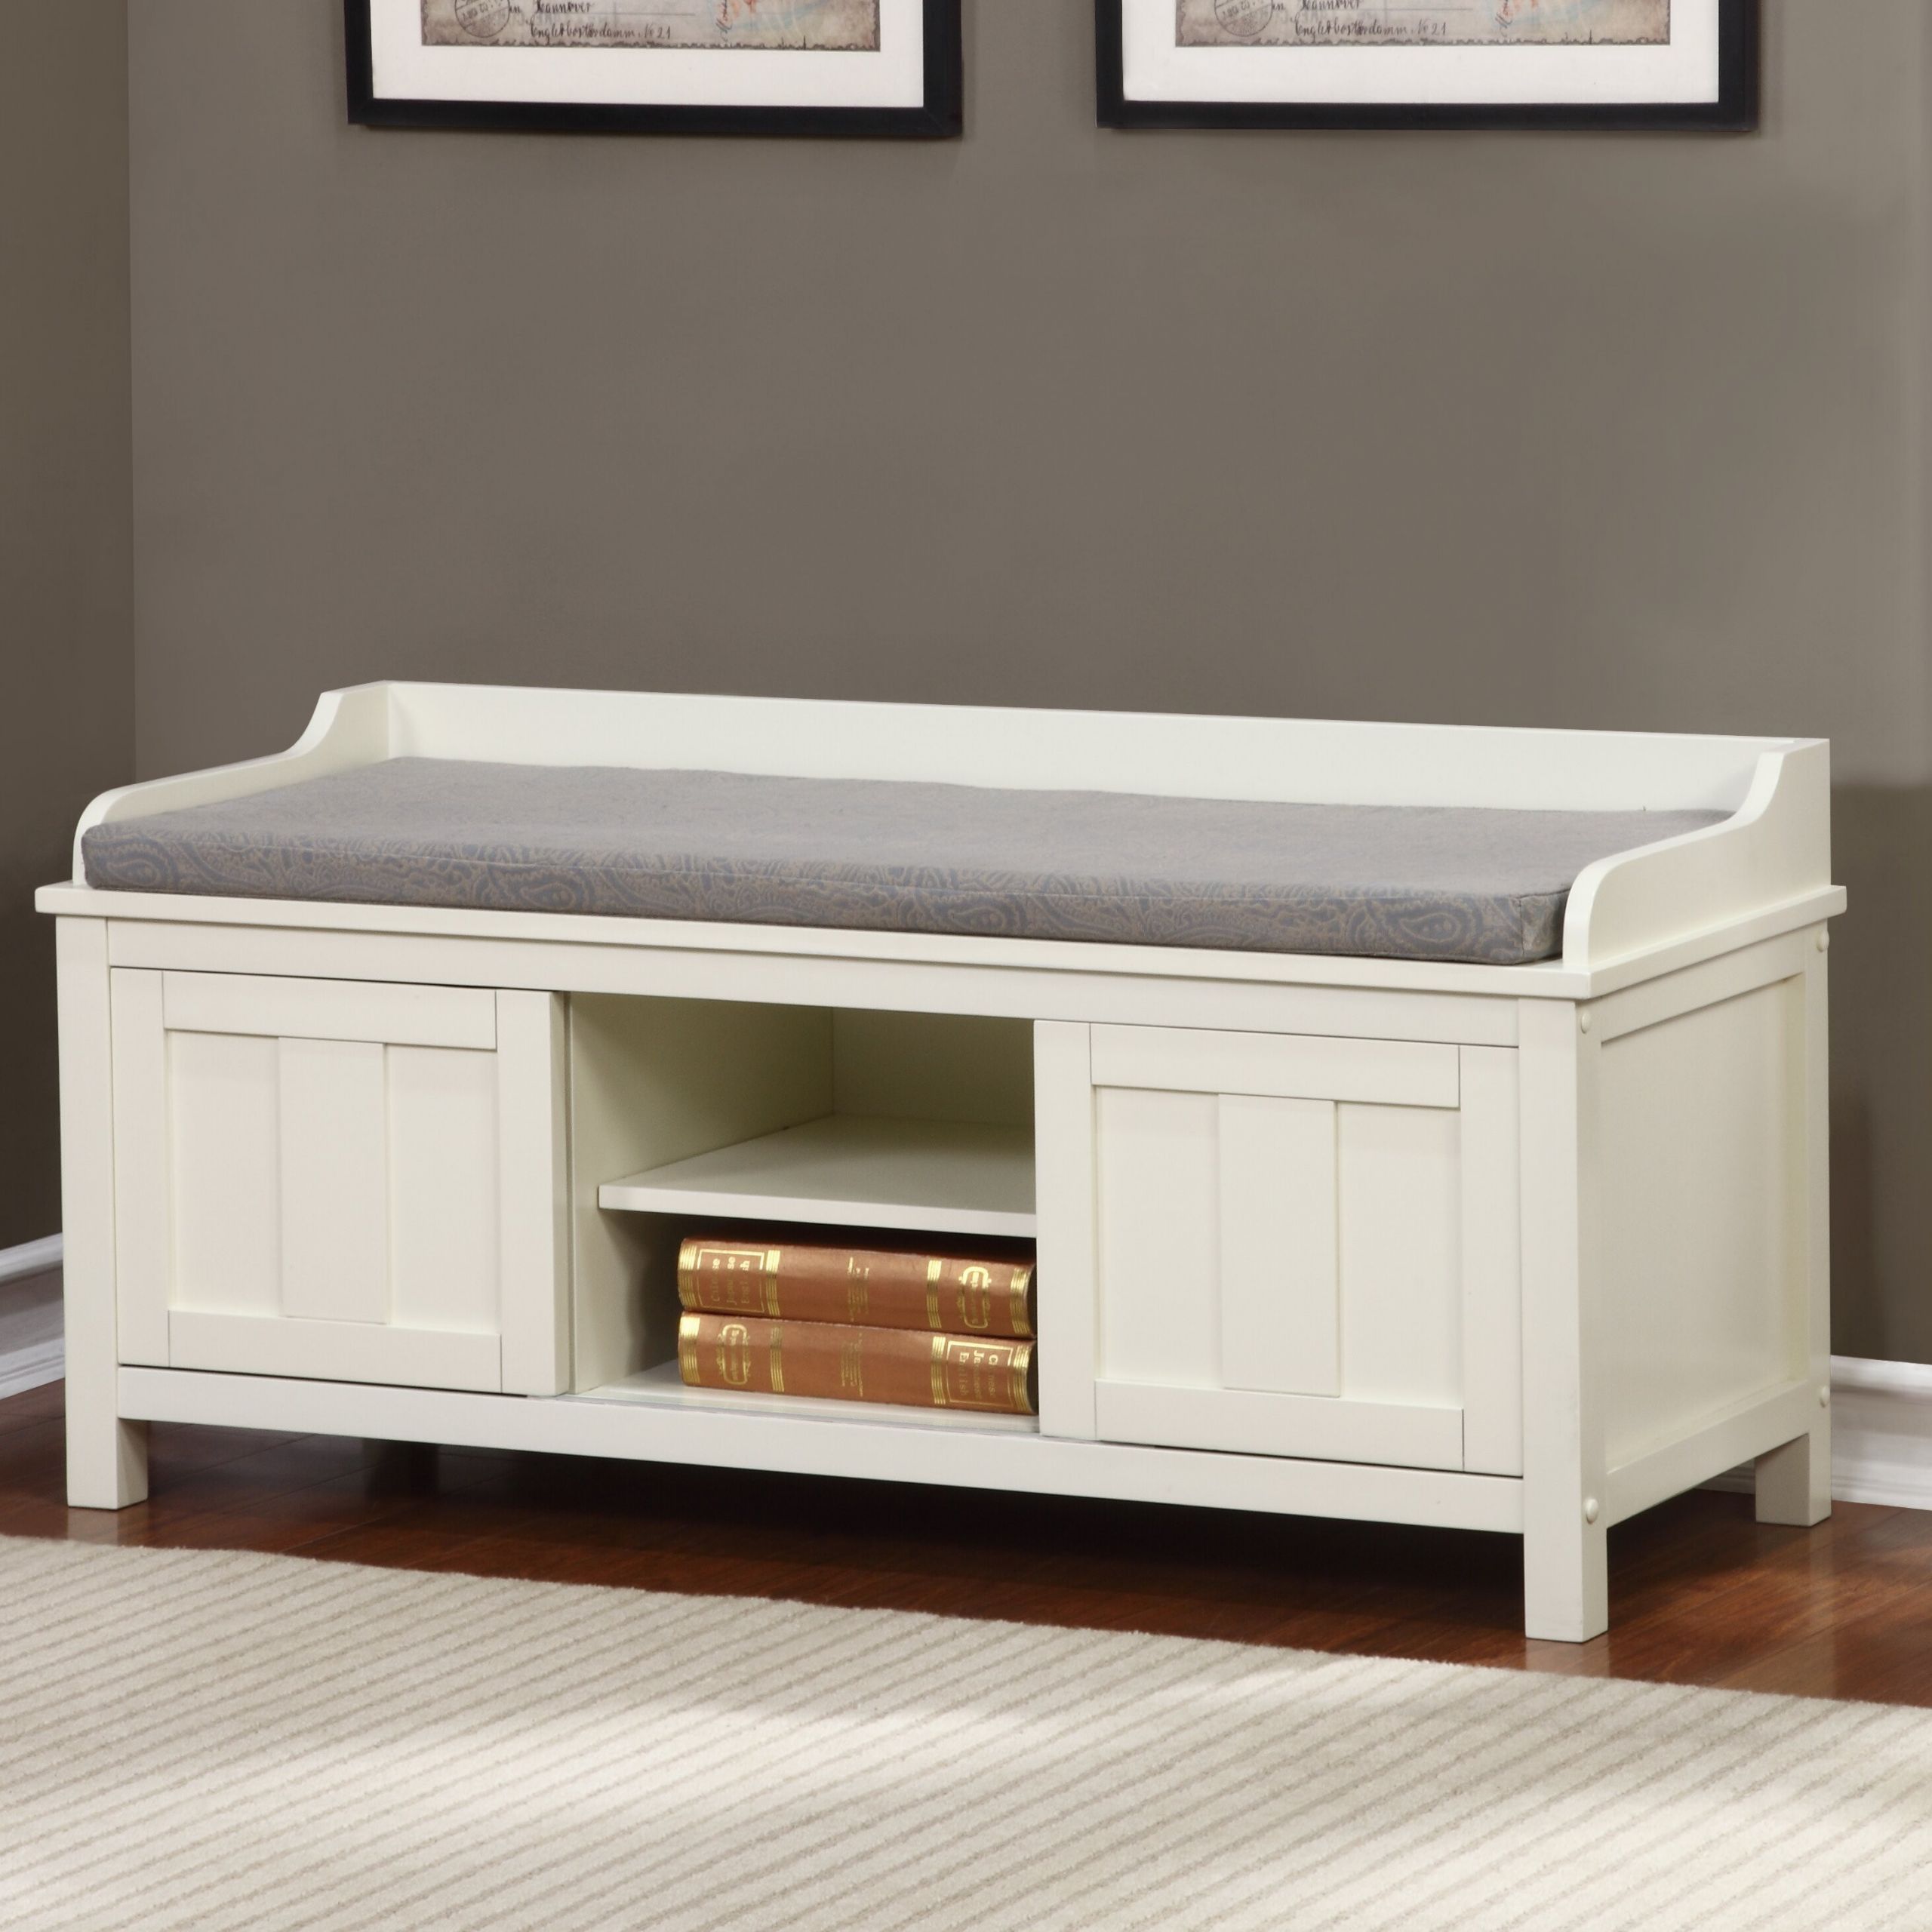 Bench For Entryway With Storage
 Breakwater Bay Maysville Wood Storage Entryway Bench